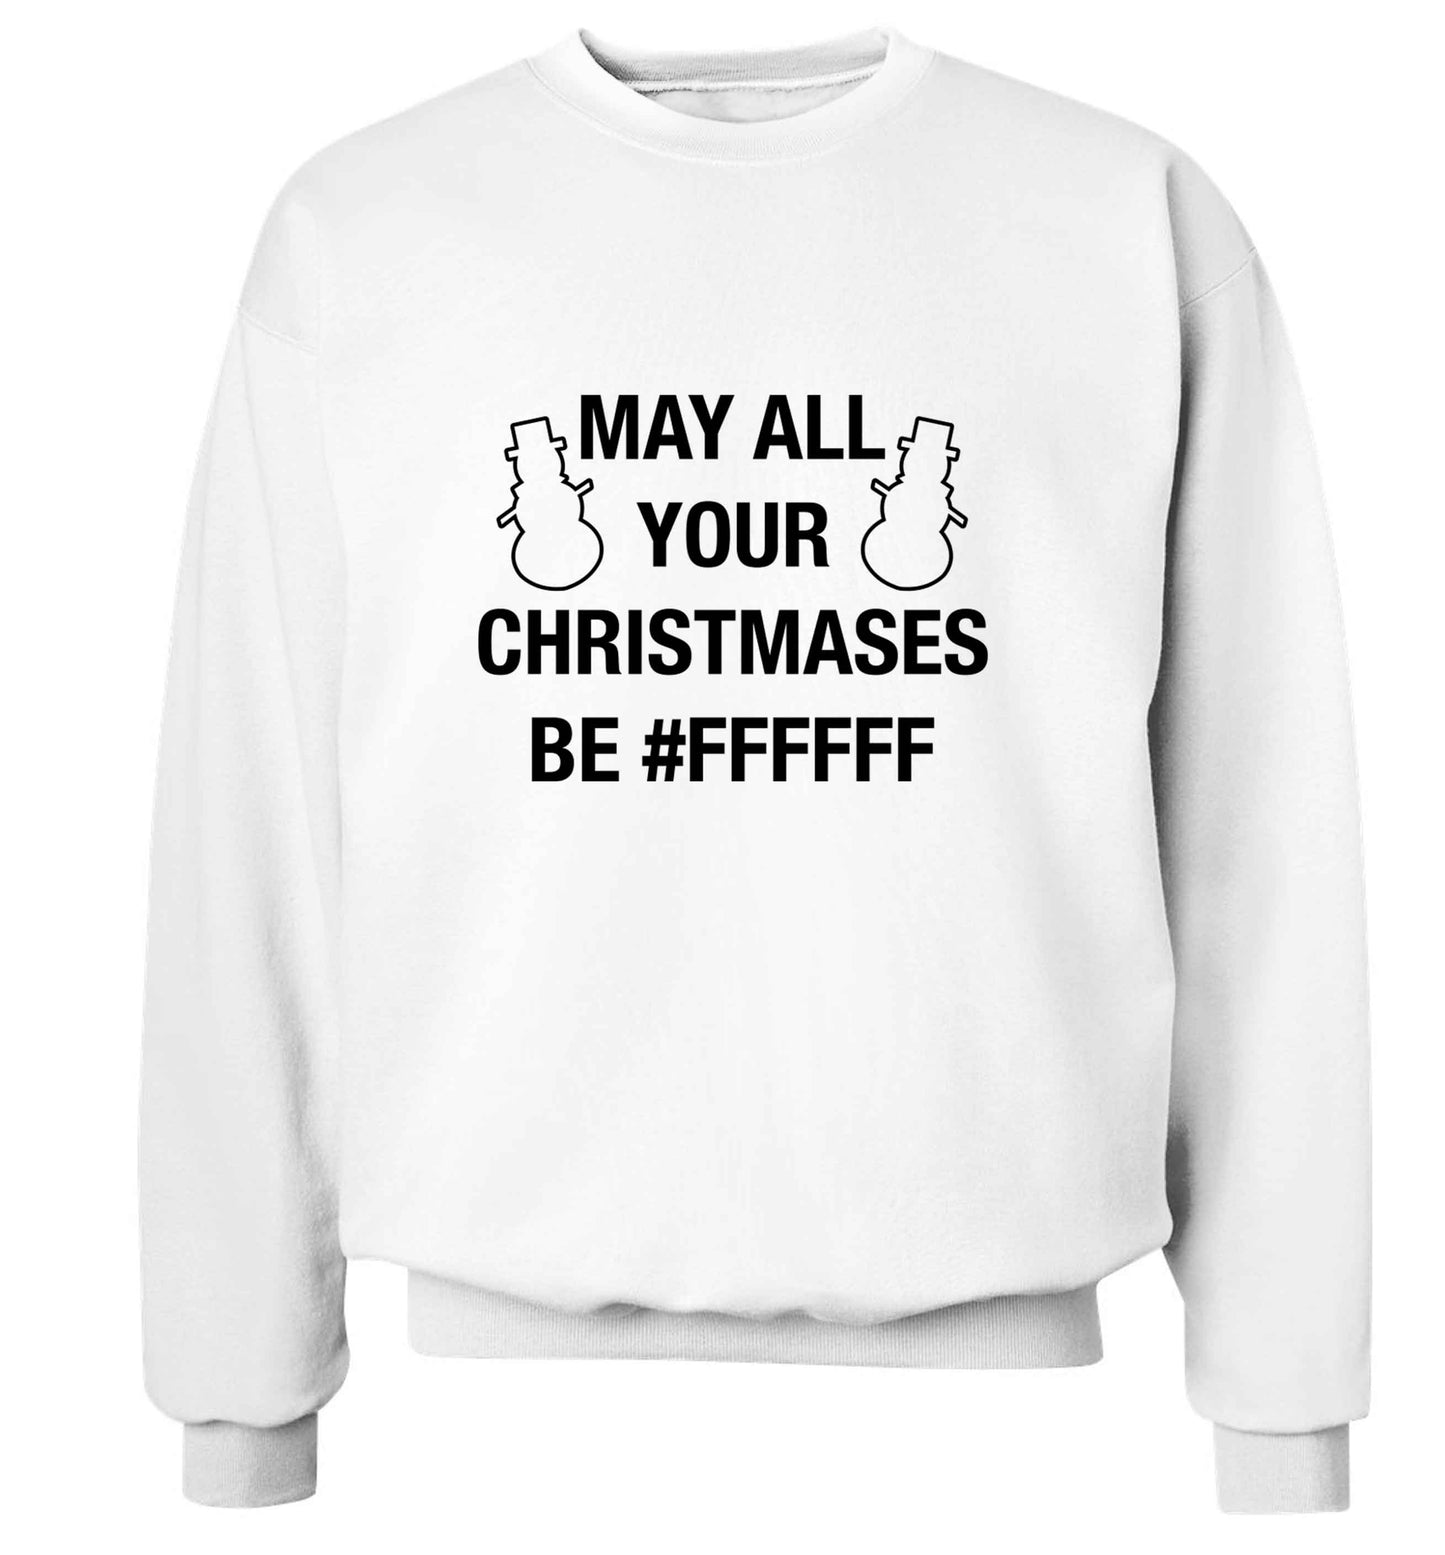 May all your Christmases be #FFFFFF adult's unisex white sweater 2XL